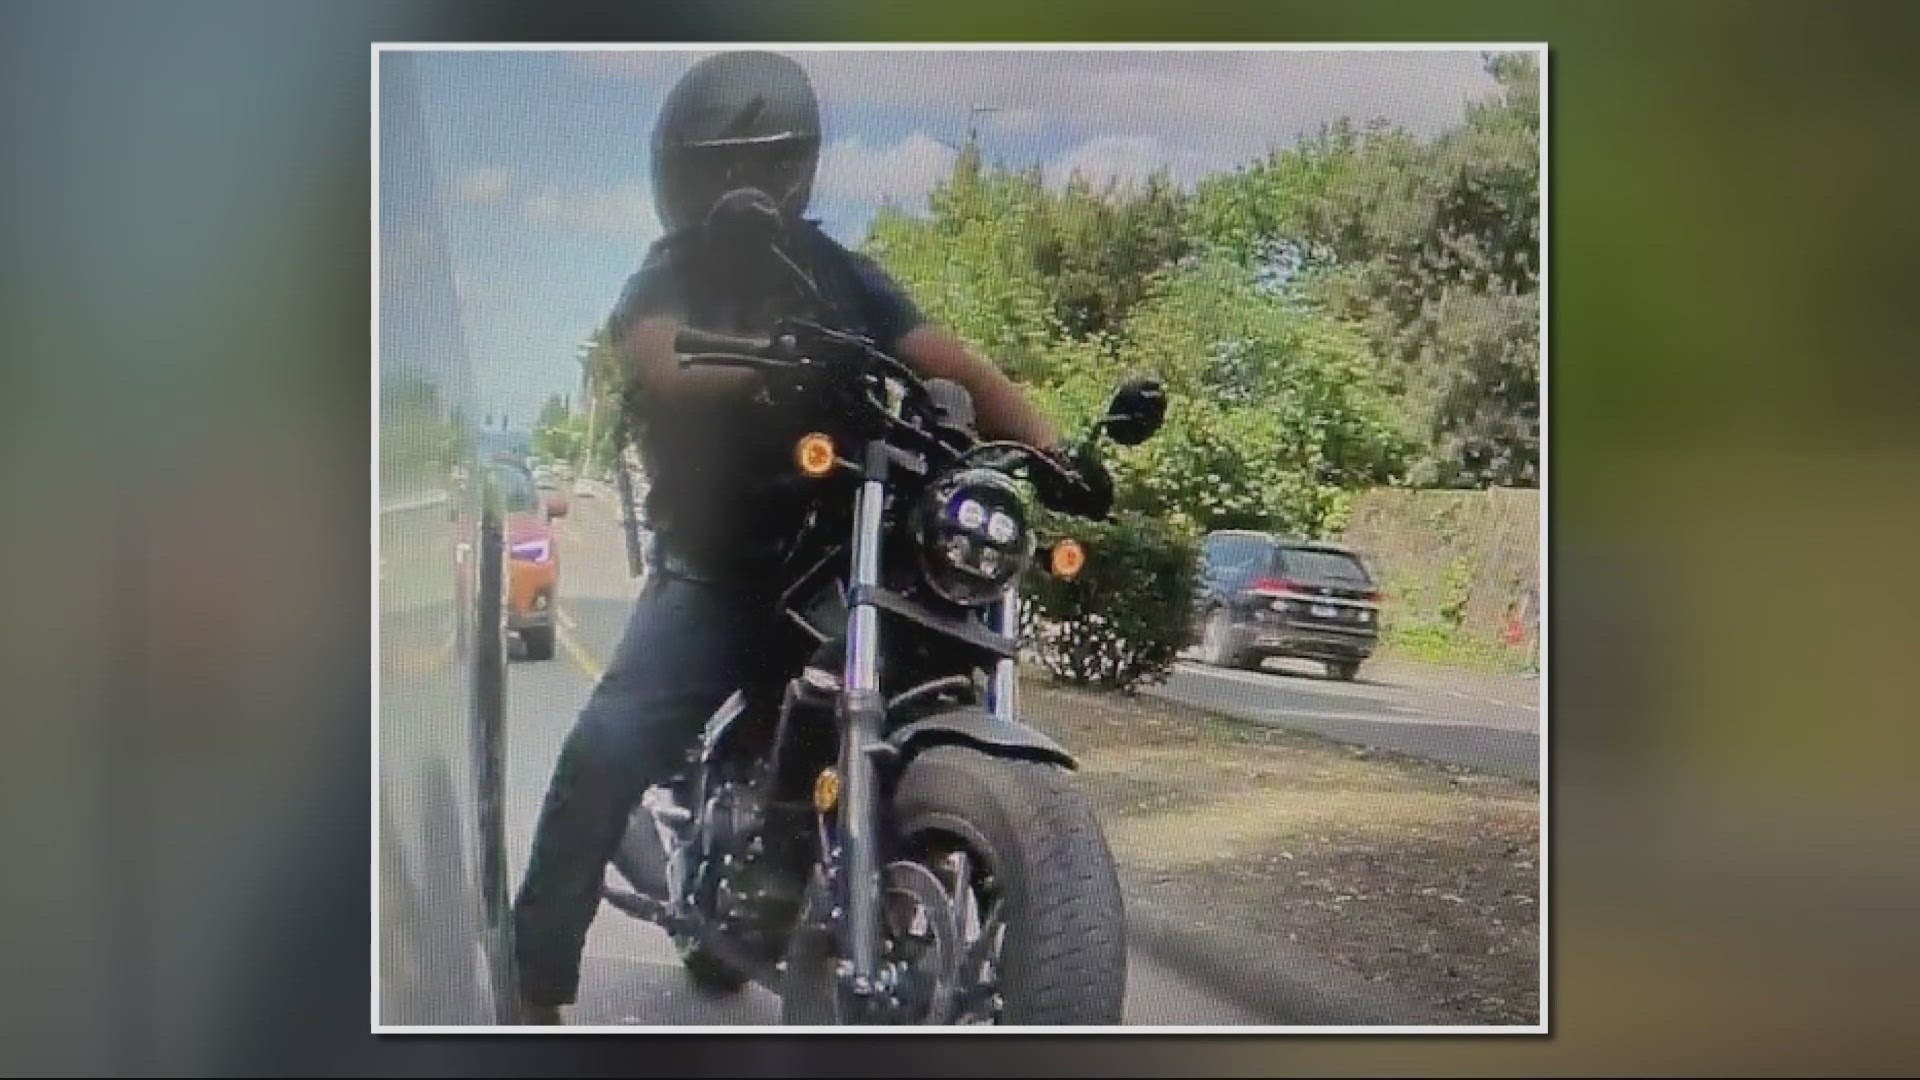 A man on a motorcycle allegedly threatened a woman with a knife with her kids in the car.